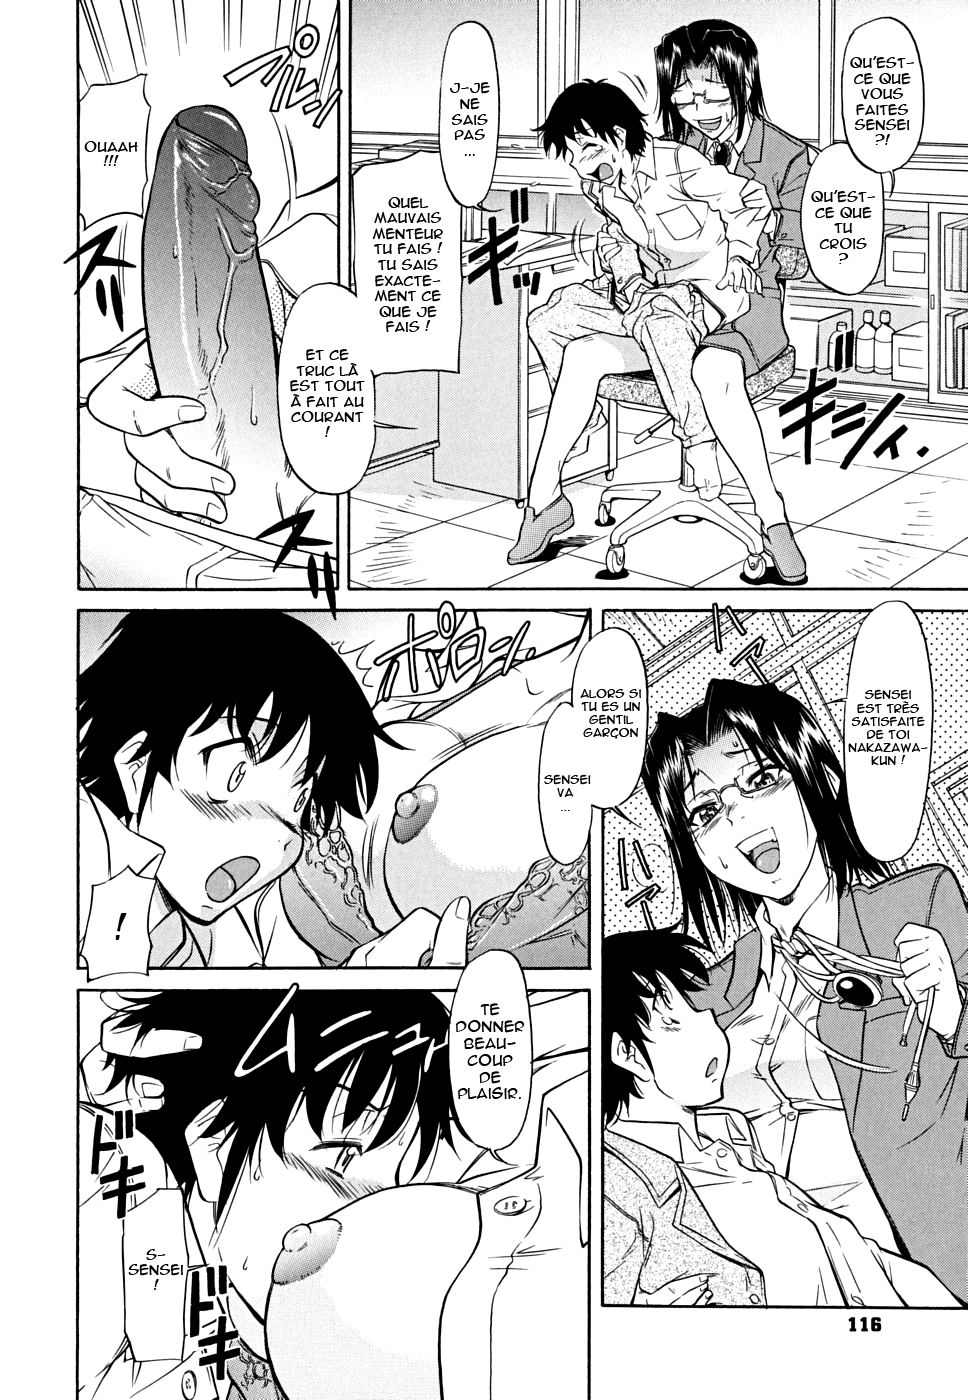 Inner Equal Bloomers Ch. 1-7 numero d'image 118